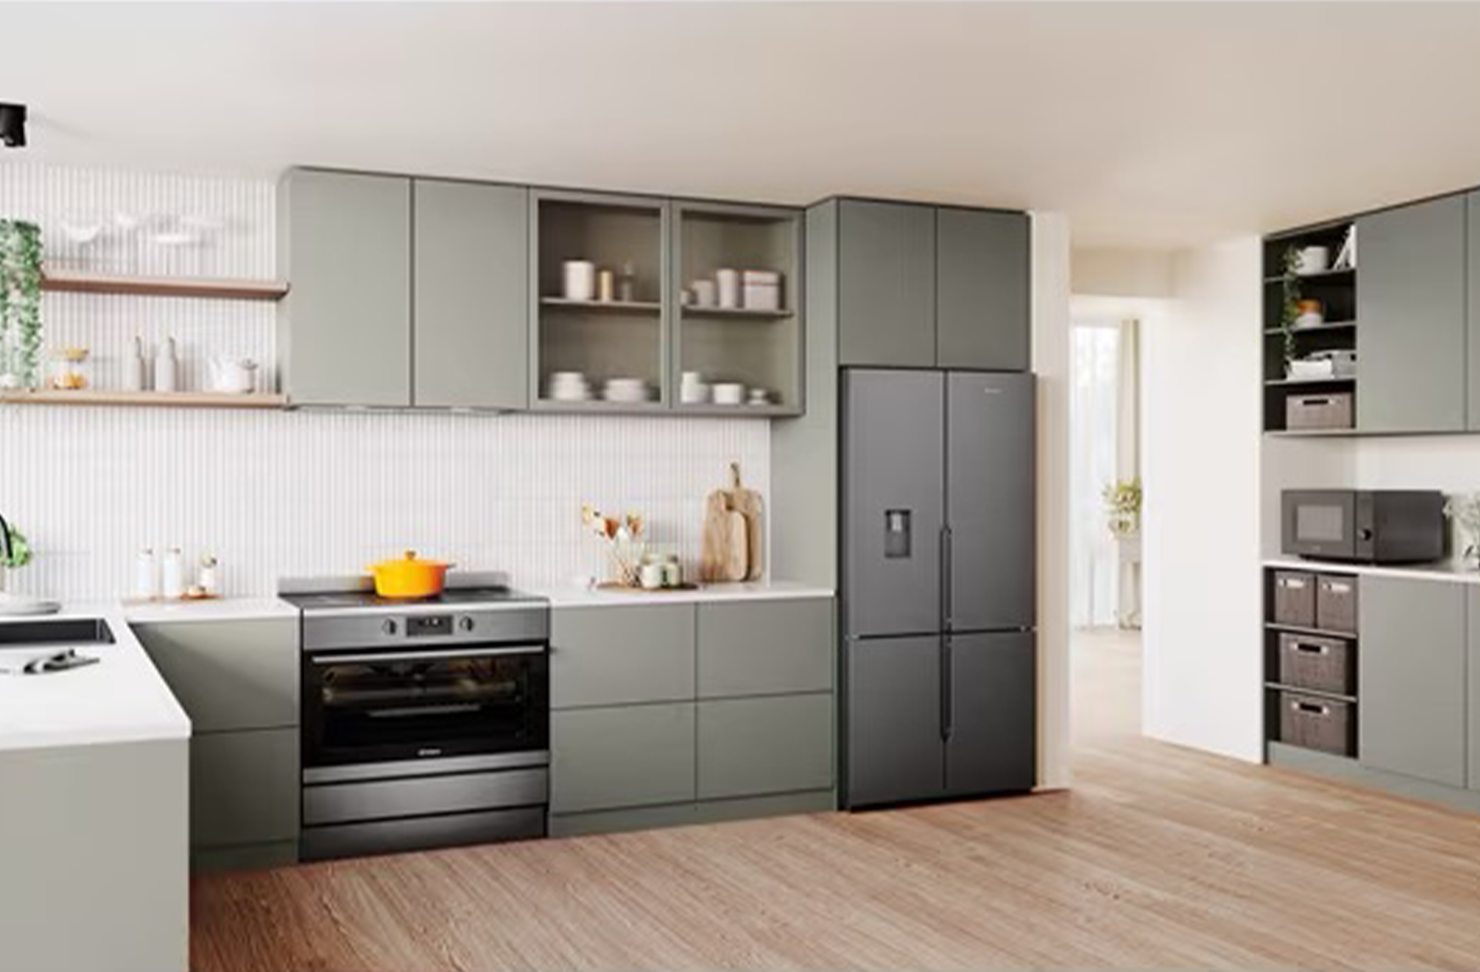 Matte green kitchen with fridge and stove